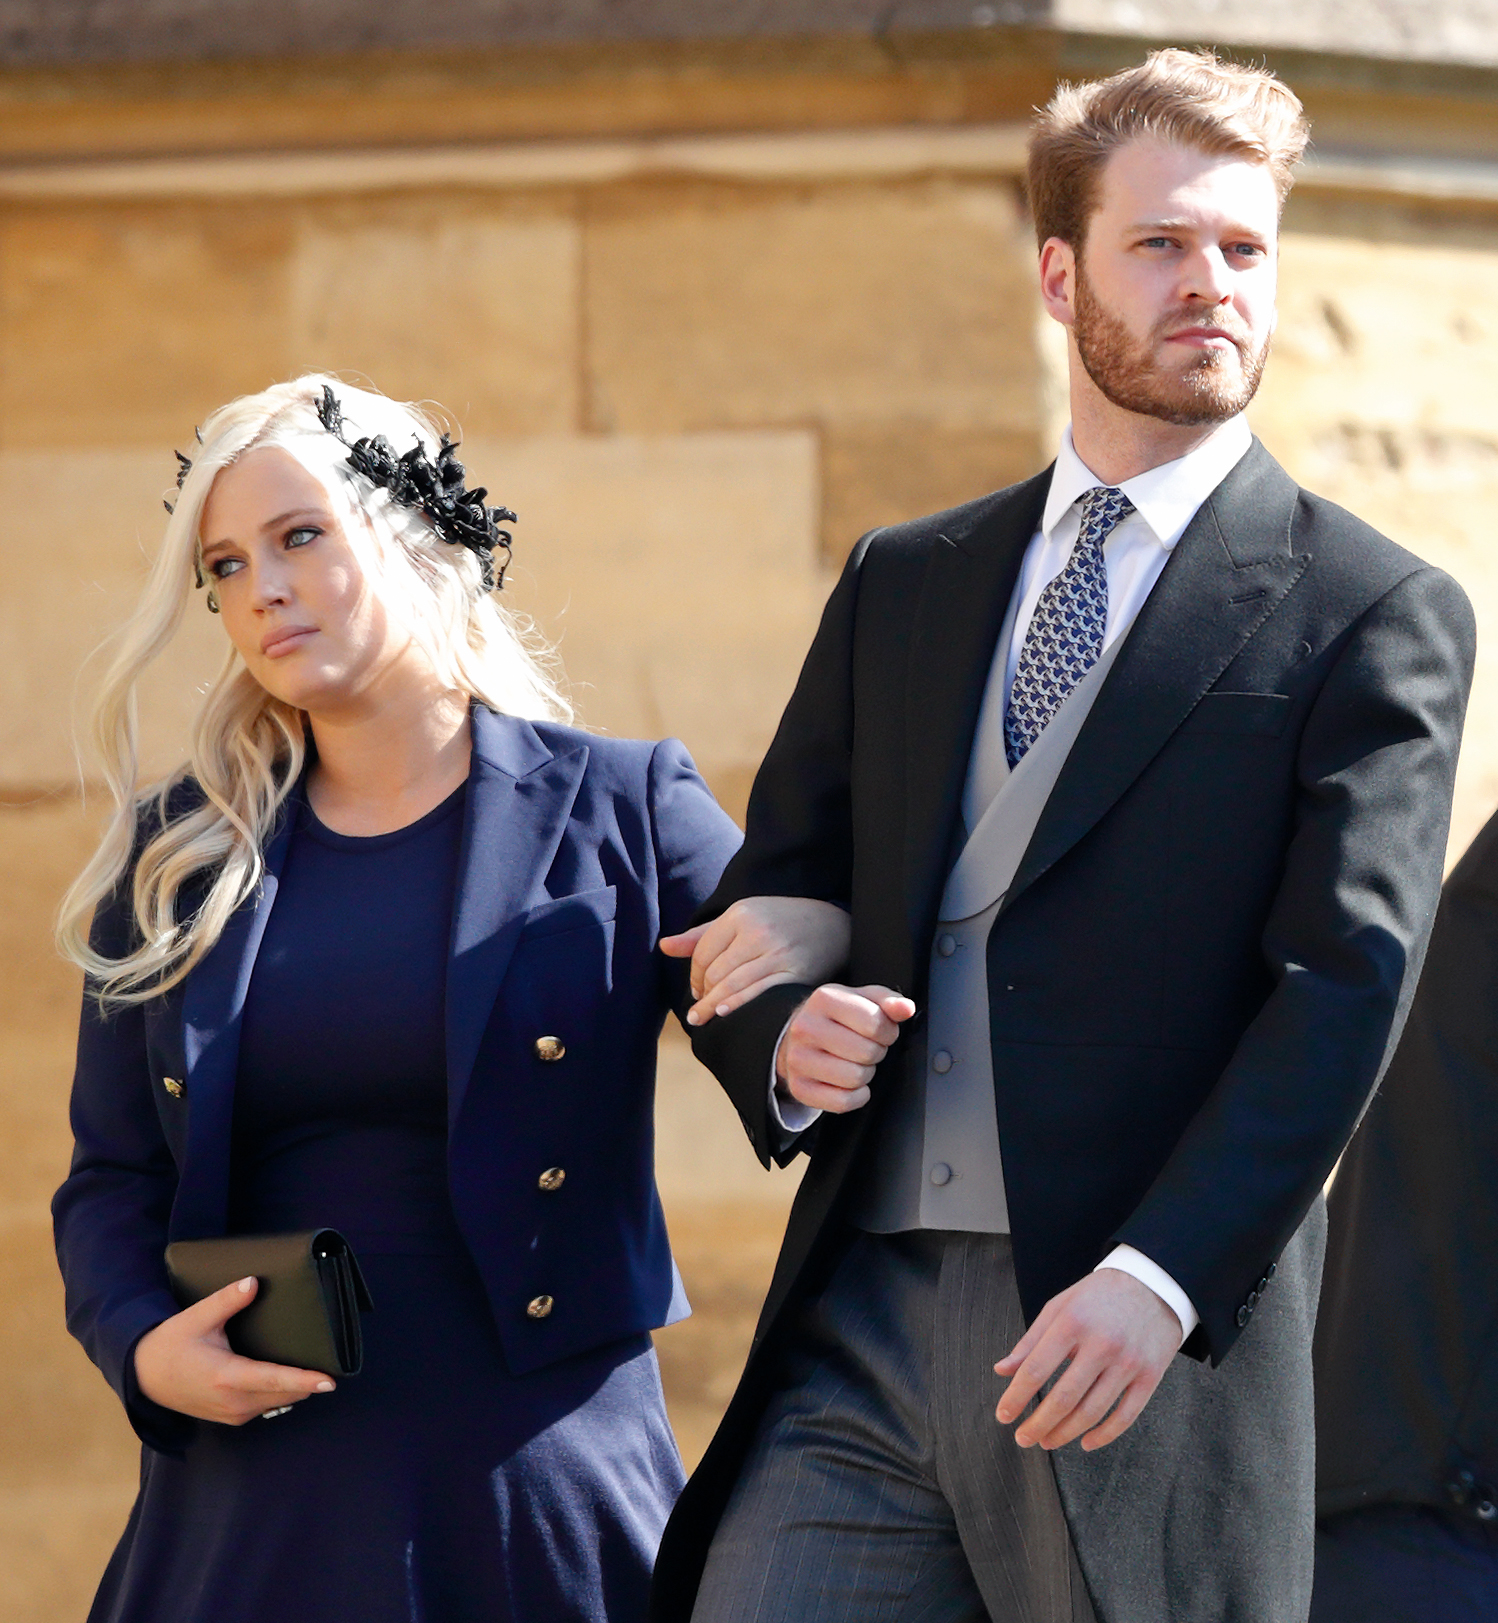 Lady Eliza Spencer and Louis Spencer attend the wedding of Prince Harry and Meghan Markle at St George's Chapel, Windsor Castle on May 19, 2018 in Windsor, England. | Source: Getty Images